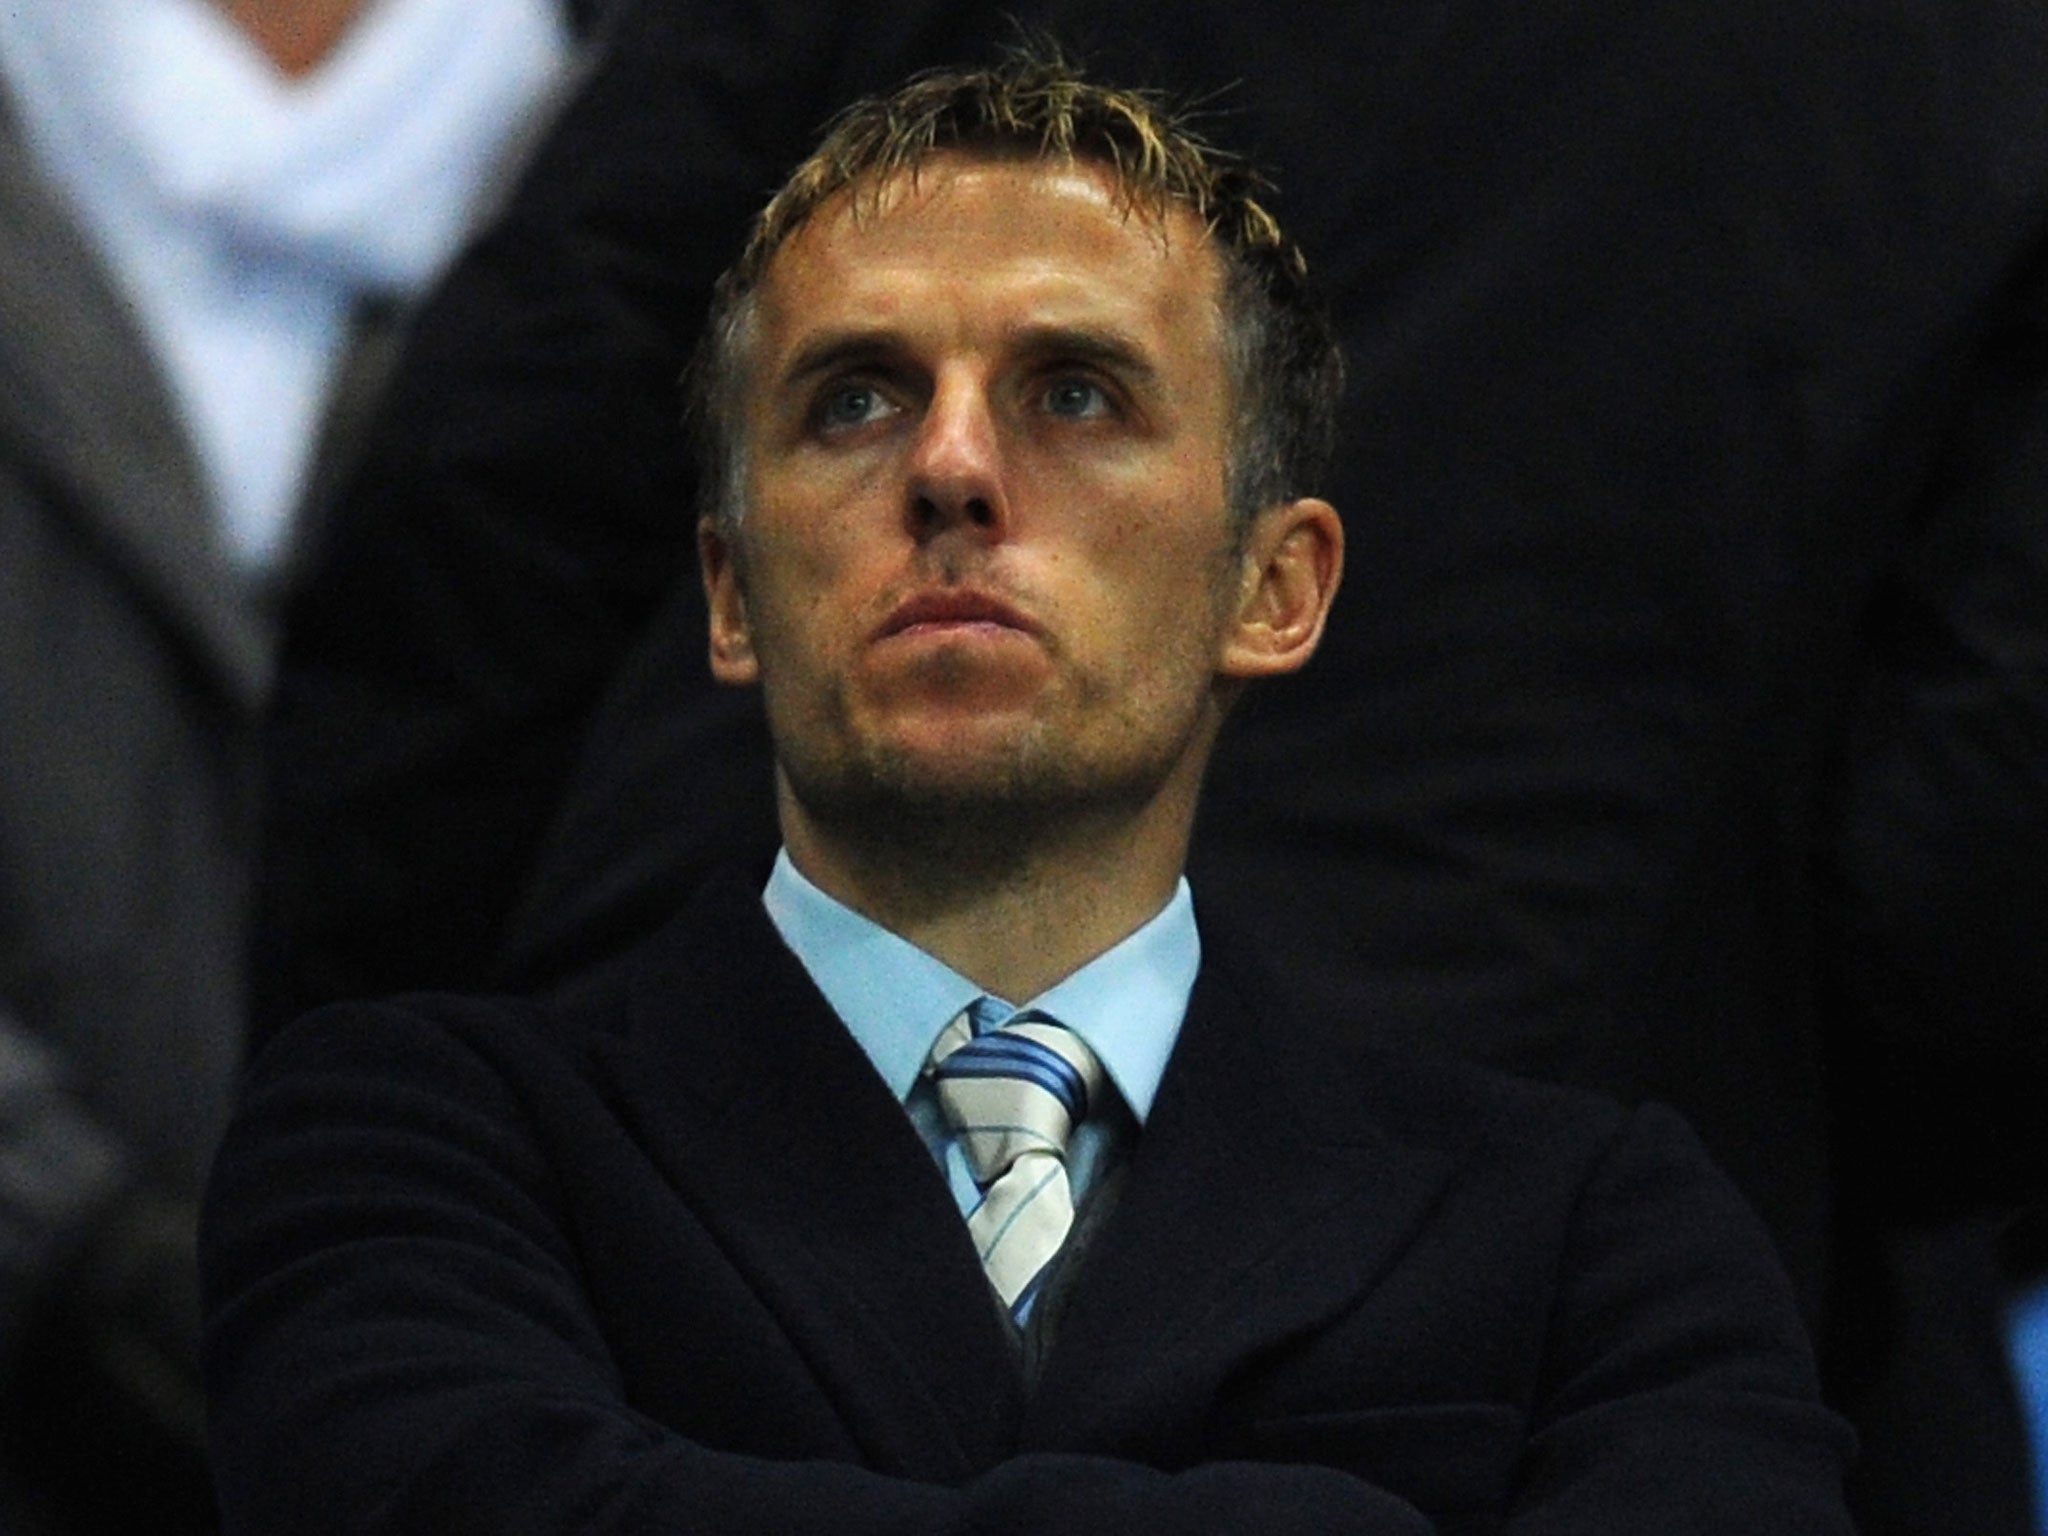 Former footballer Dietmar Hamann warned Neville not to read his Twitter at half-time to avoid the abuse